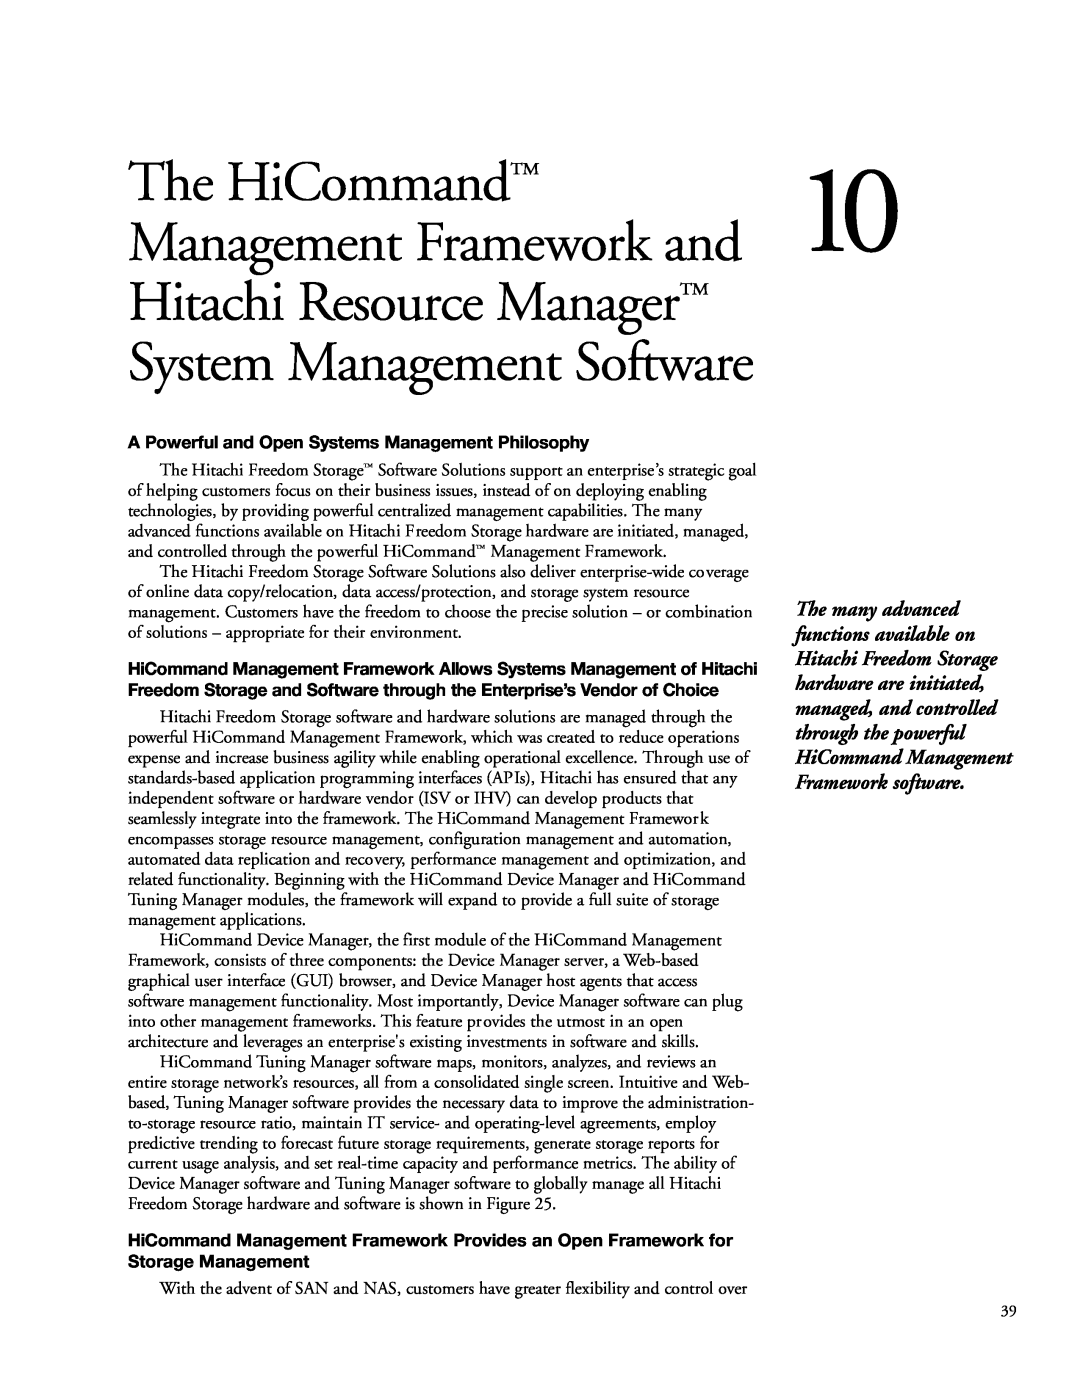 Hitachi 9900 manual The HiCommand, Management Framework and, A Powerful and Open Systems Management Philosophy 